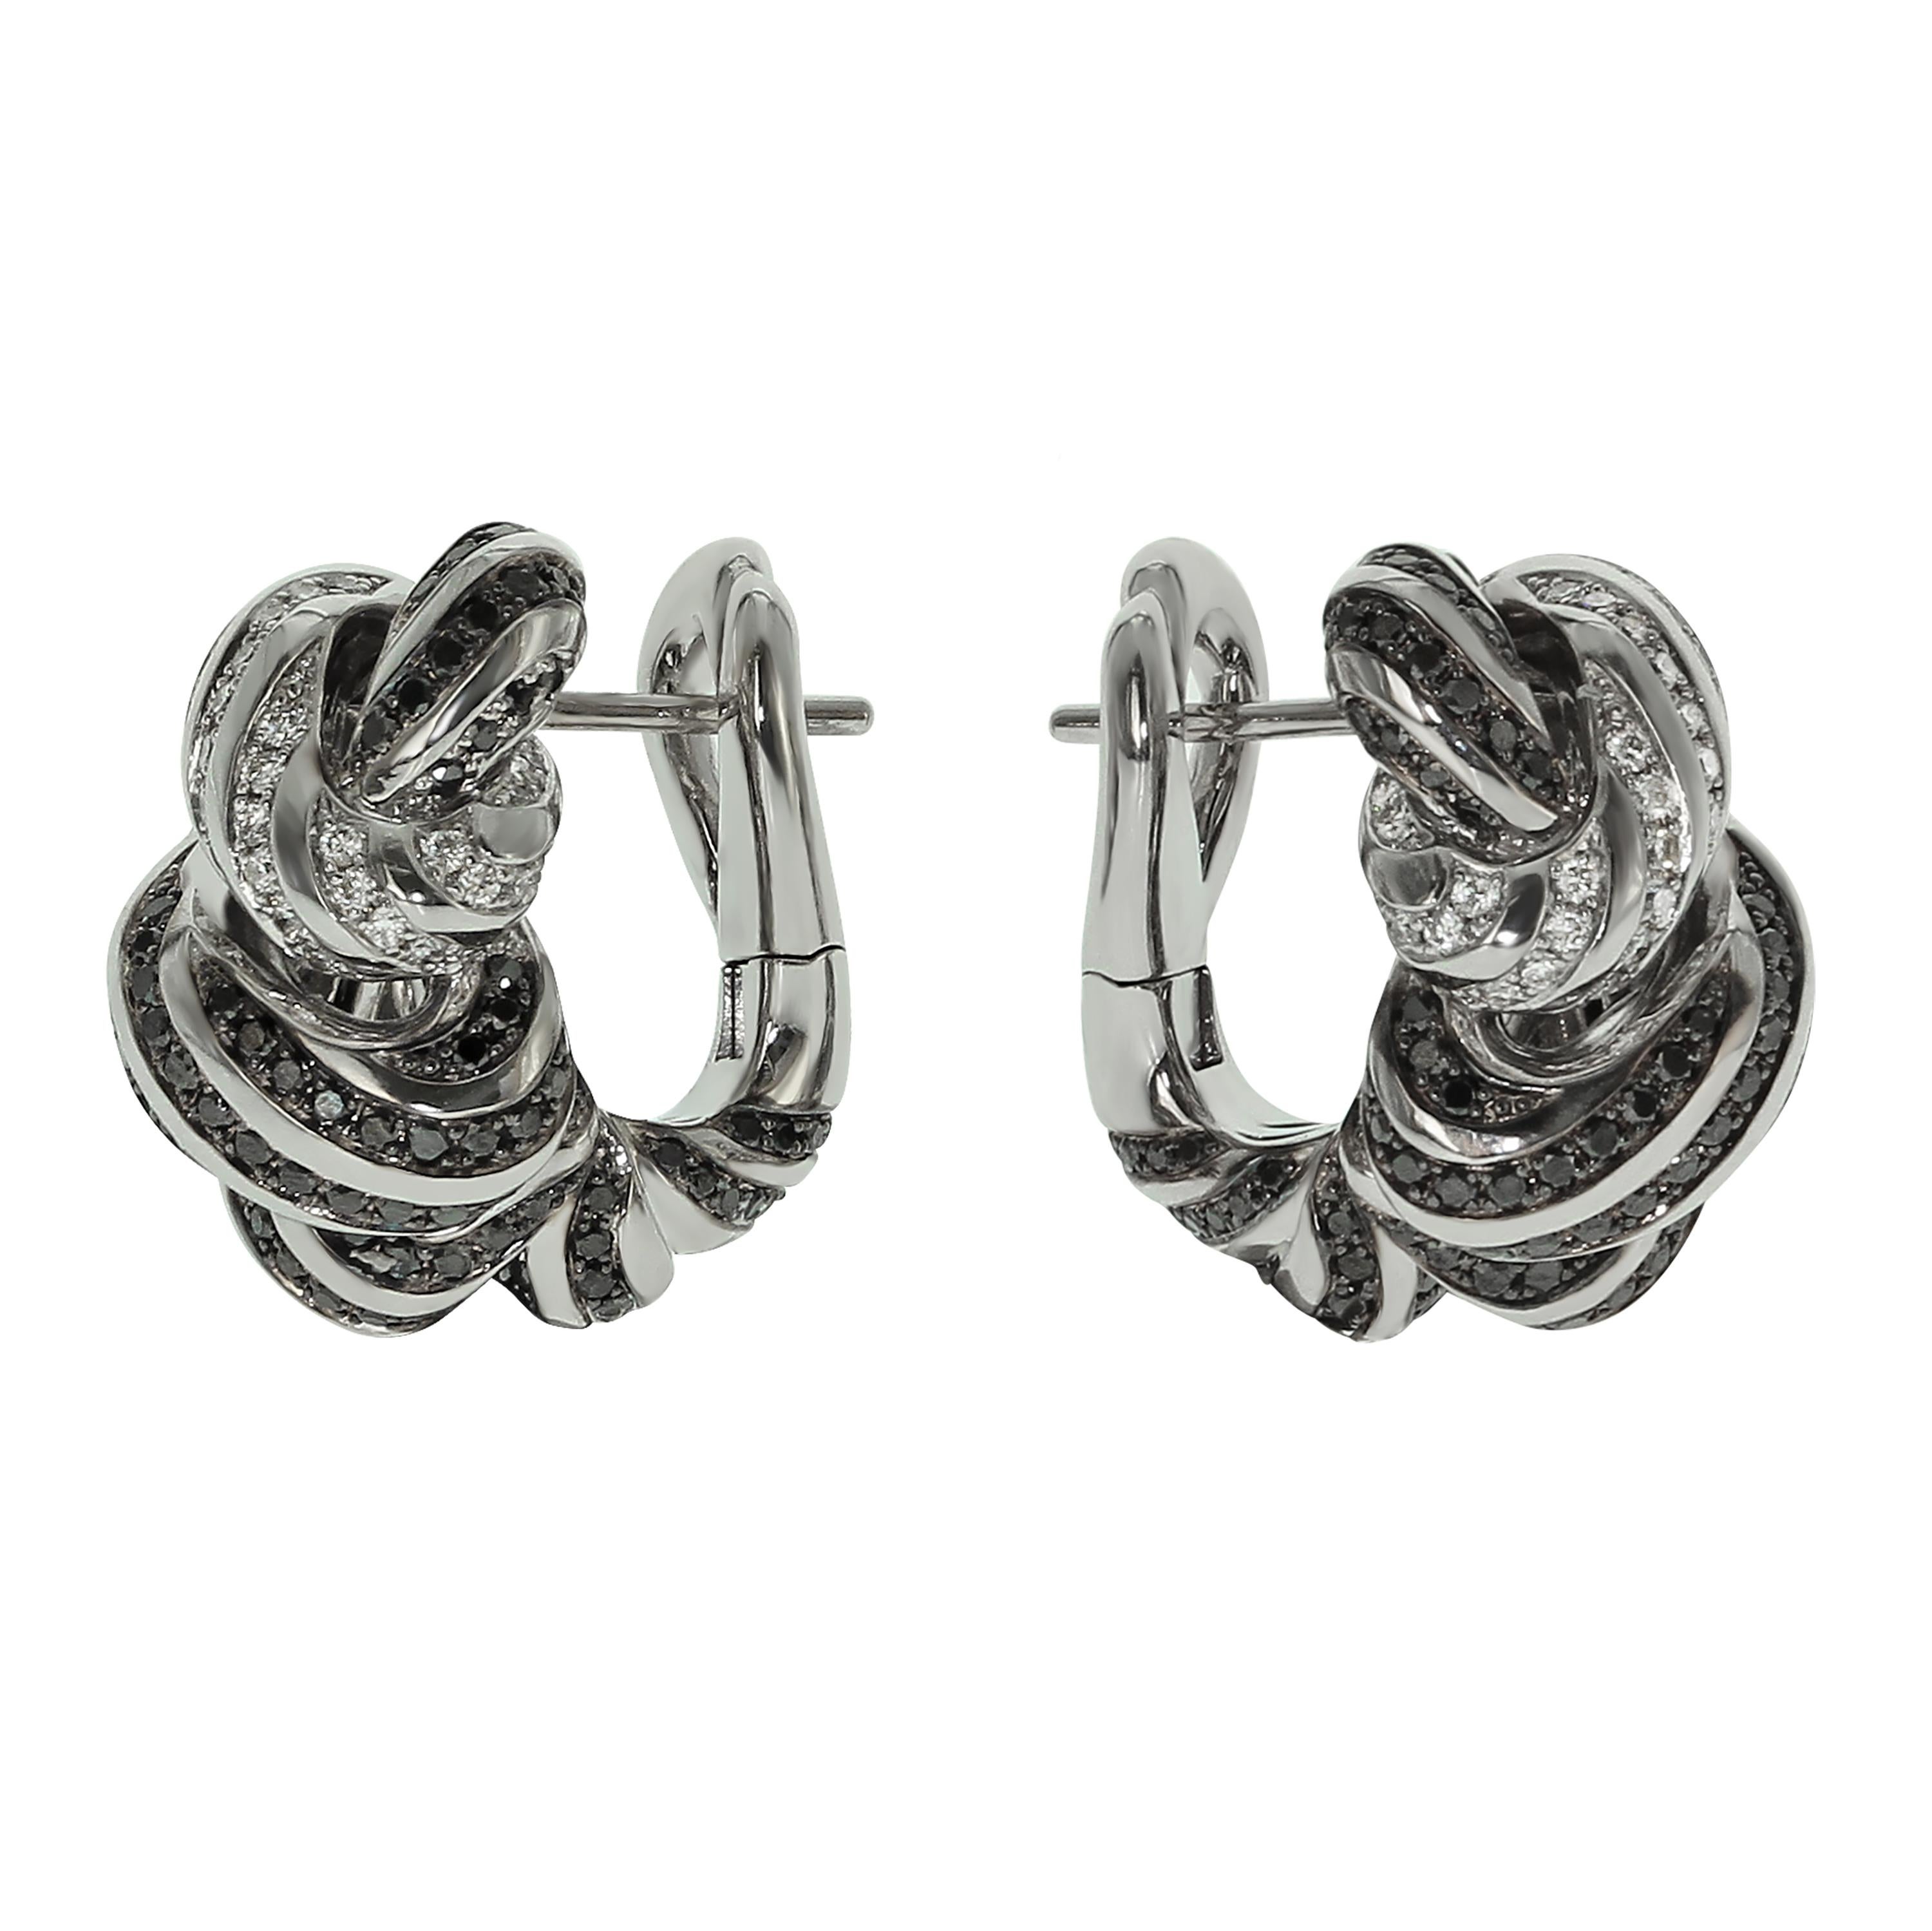 White and Black Diamonds 18 Karat White Gold Earrings
Stunning contrast of 90 White and 302 Black Diamonds totaling 2.39 Carats makes this piece of art always noticeable. Shape of the Ring looks like the interweaving of different shreds of